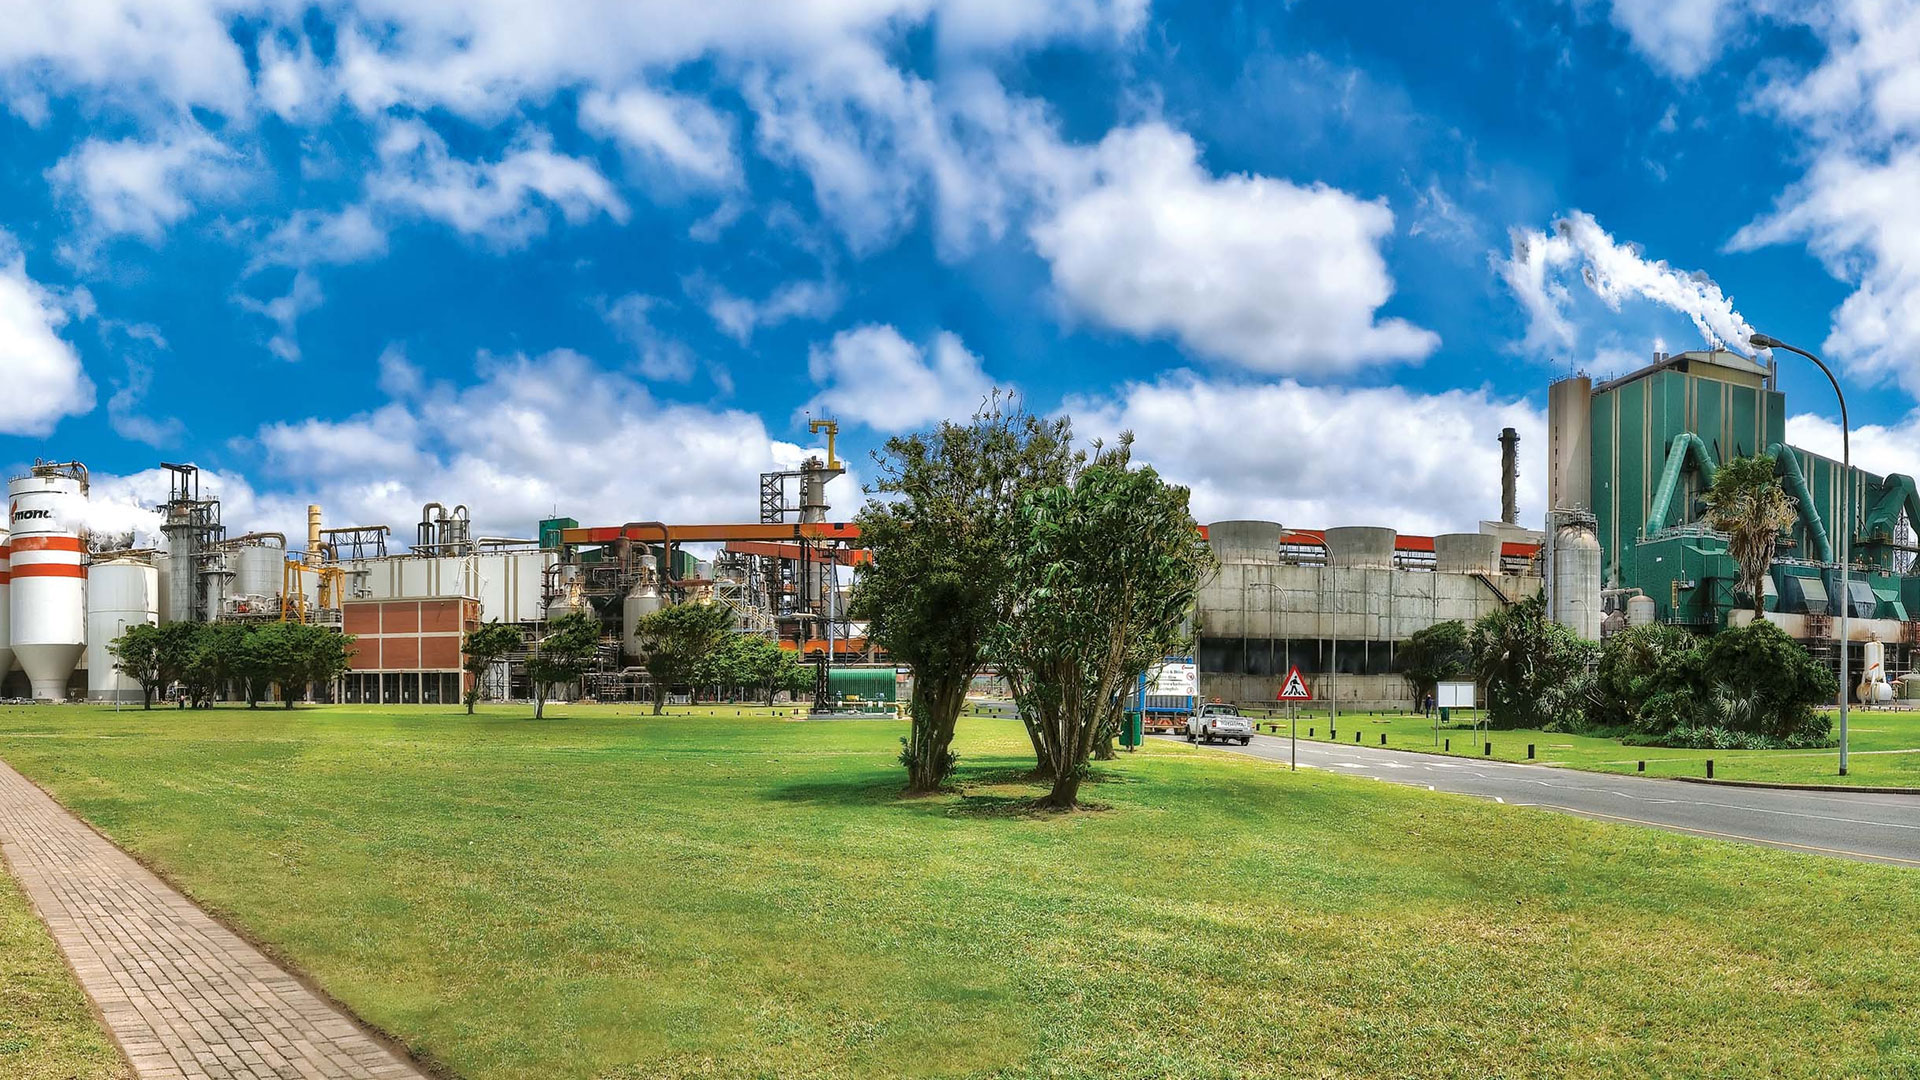 Richards bay paper mill in South Africa